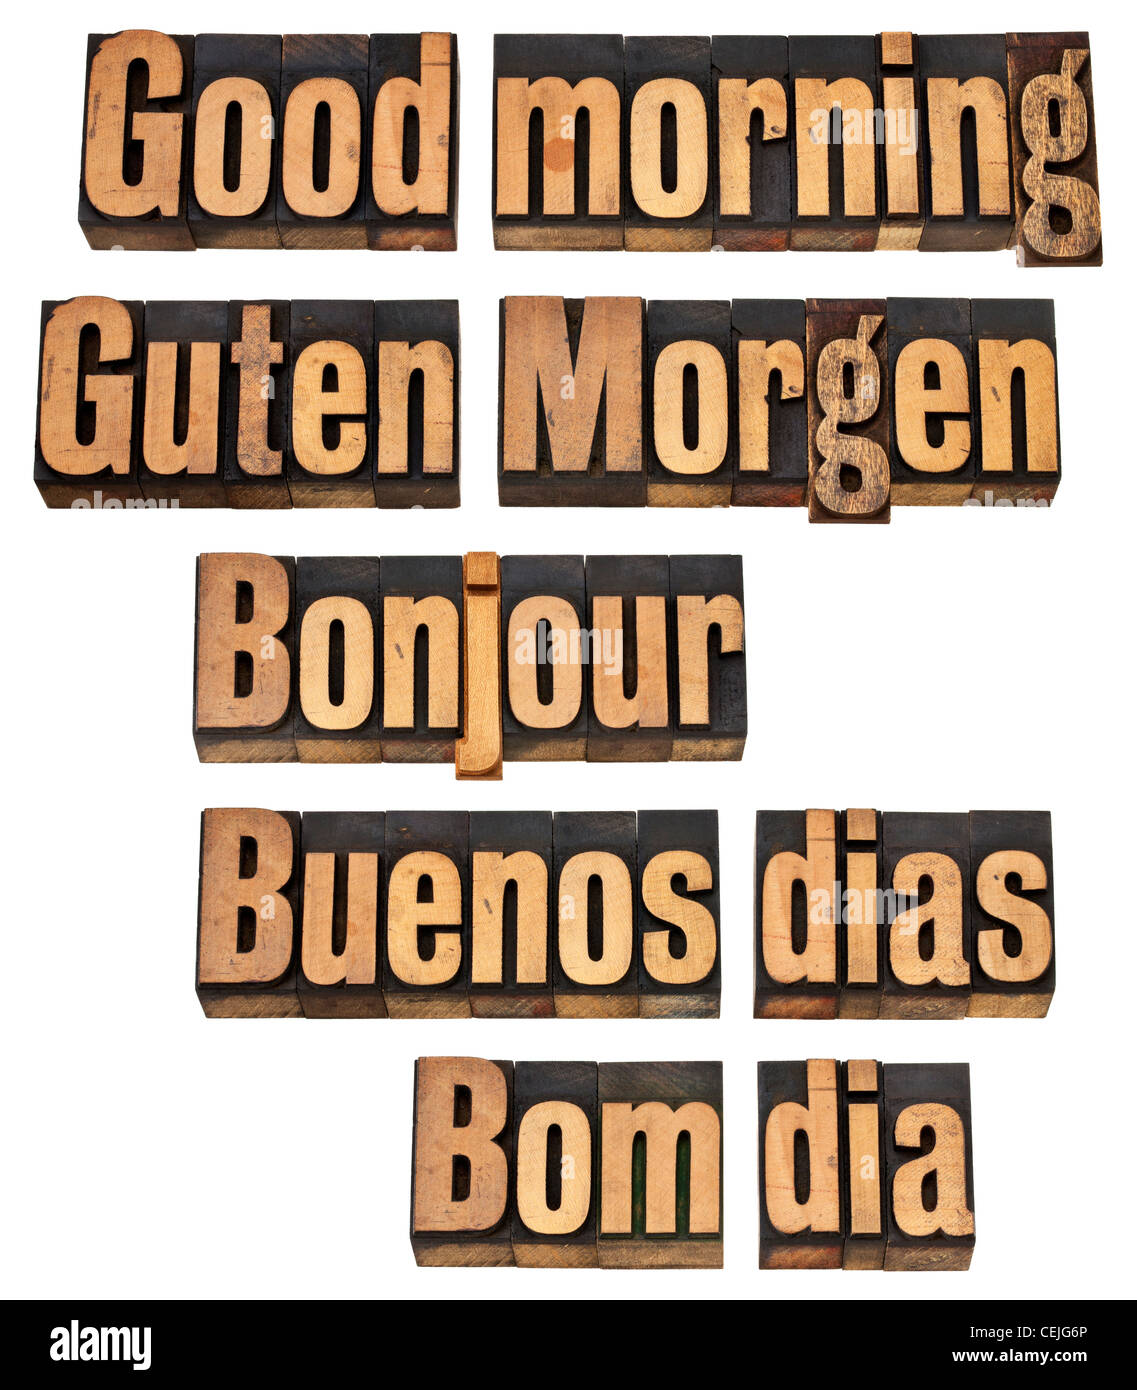 Good morning in five languages - English, German, French, Spanish and Portuguese - a collage of isolated words Stock Photo